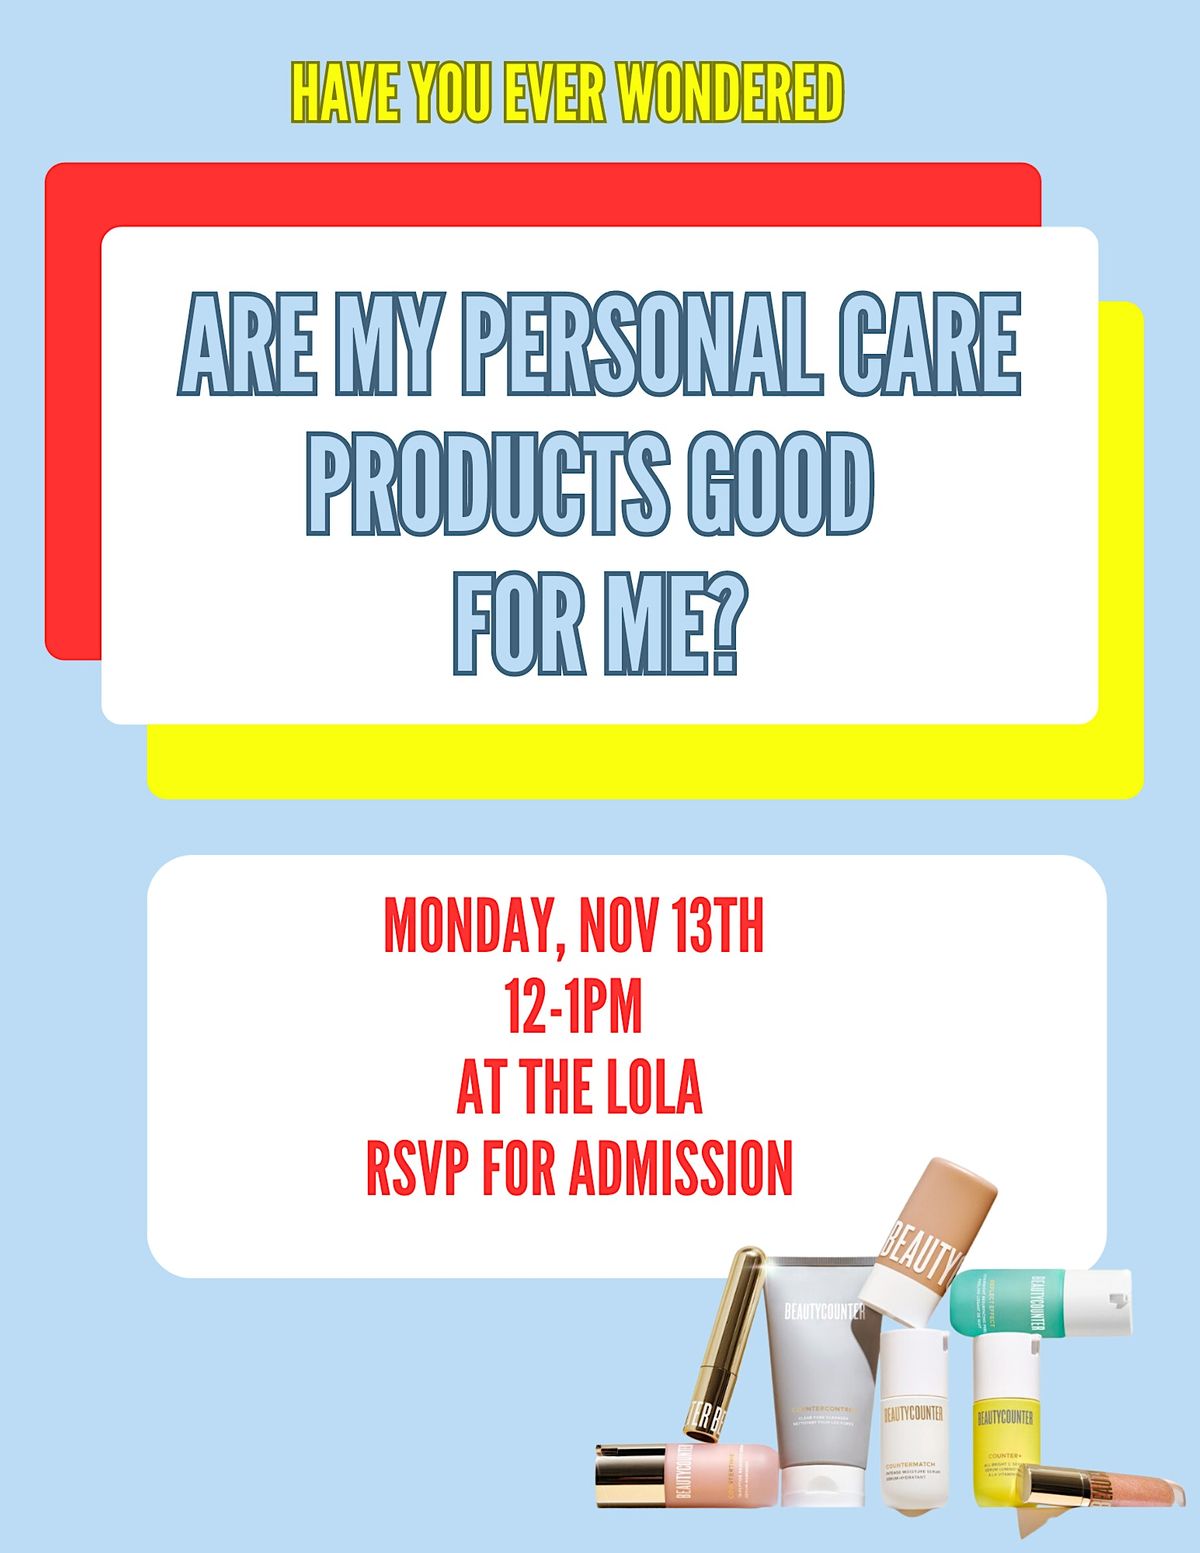 Are your personal care products good for you